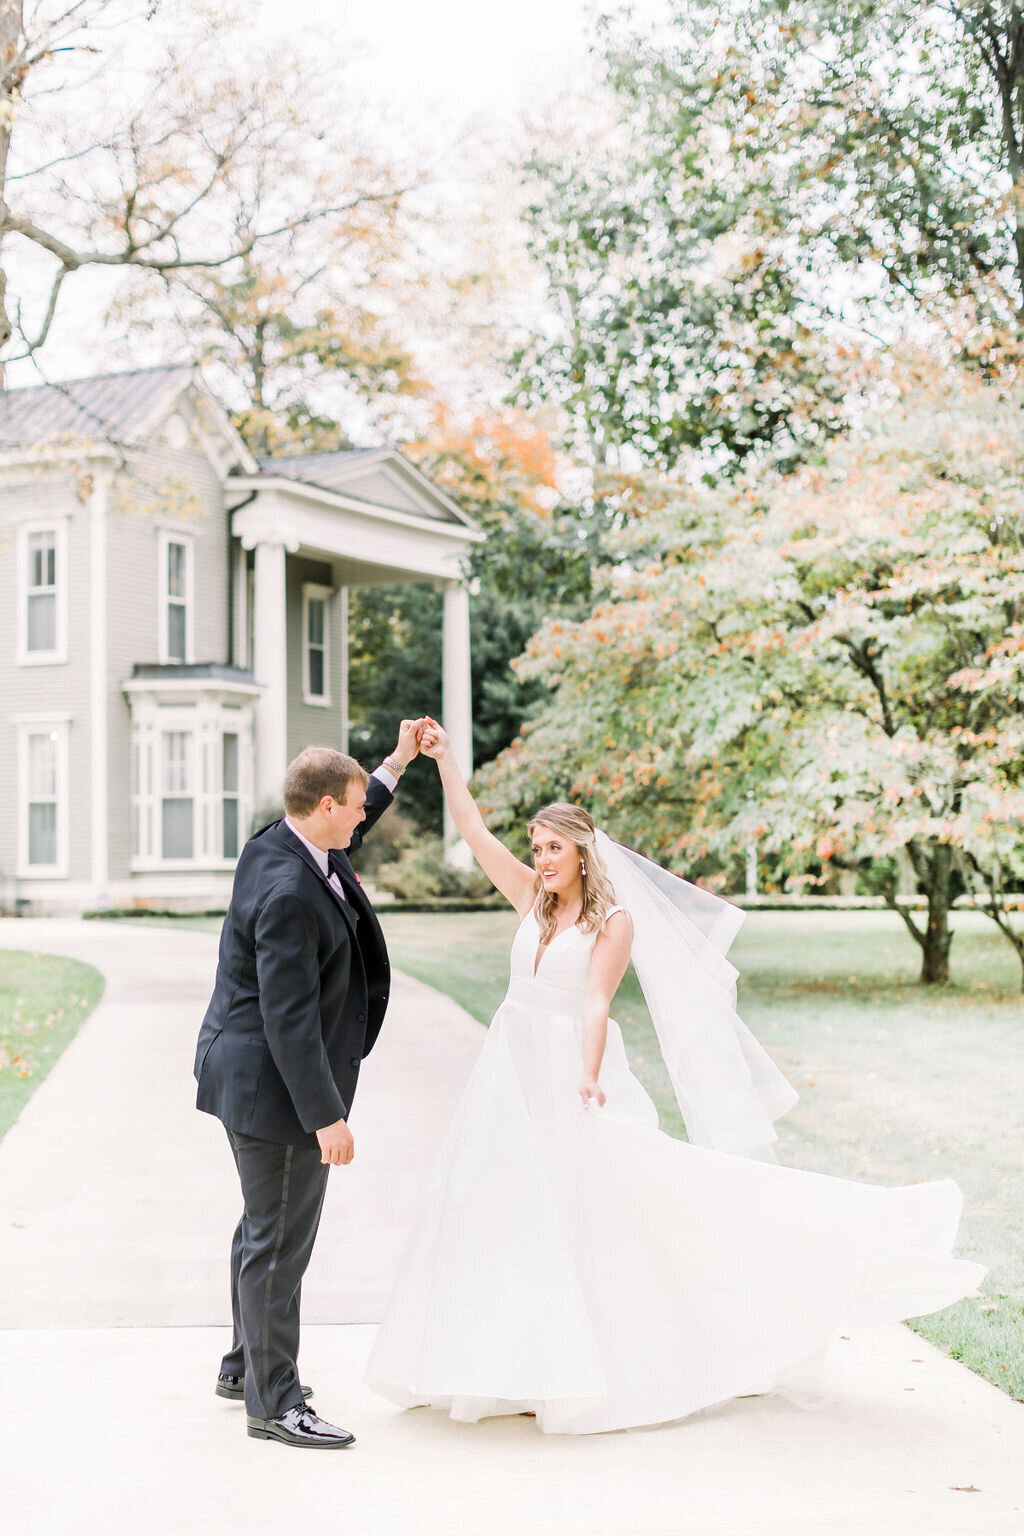 Bride and groom photographed by light and airy photographer, Paige Michelle Photography during wedding day in Bowling Green, KY